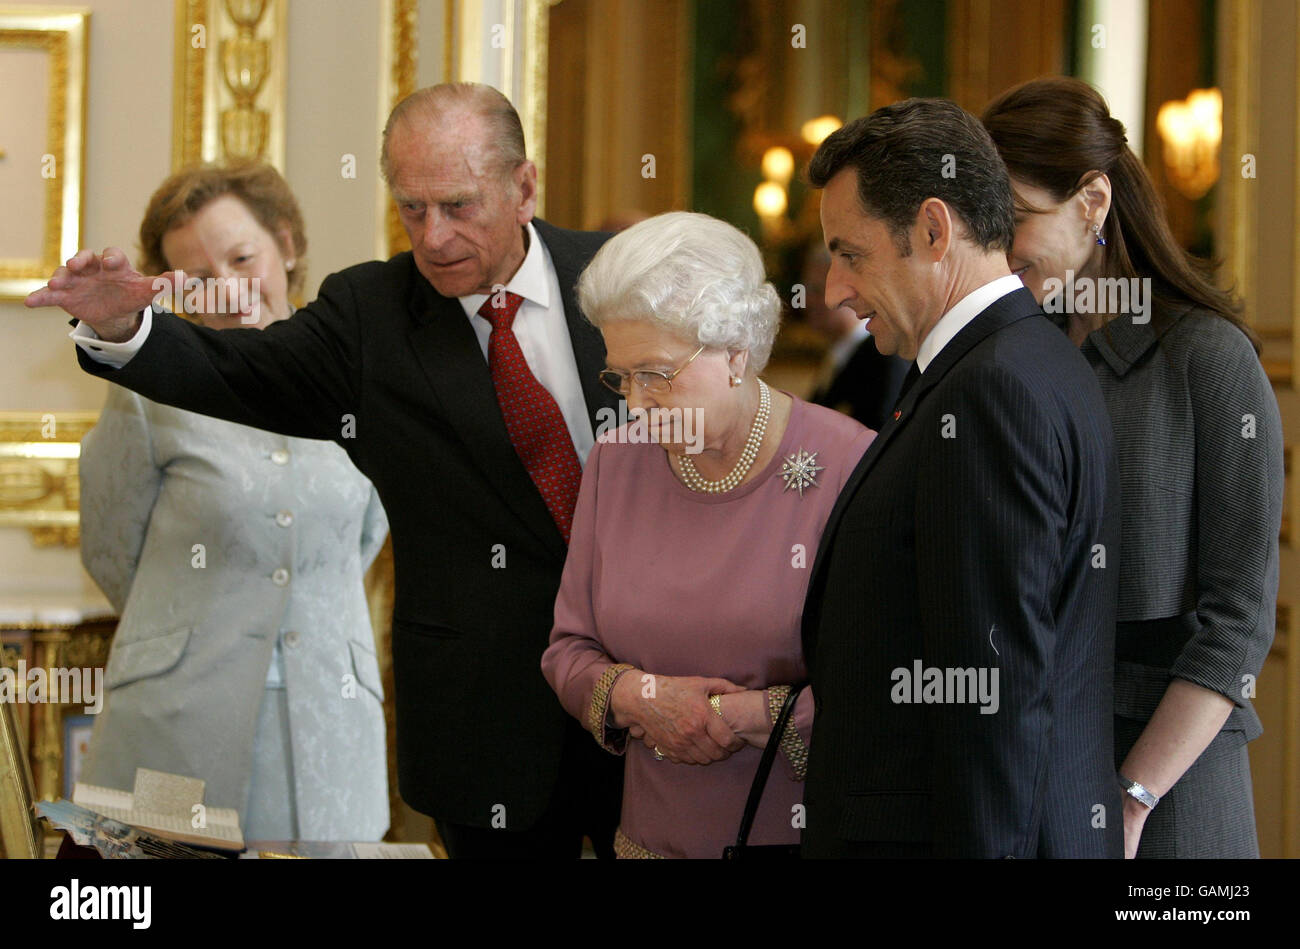 French President Nicolas Sarkozy, right, and his wife Carla Bruni-Sarkozy are shown items from the Royal Collection by Britain's Queen Elizabeth II and the Duke of Edinburgh at Windsor Castle. Stock Photo